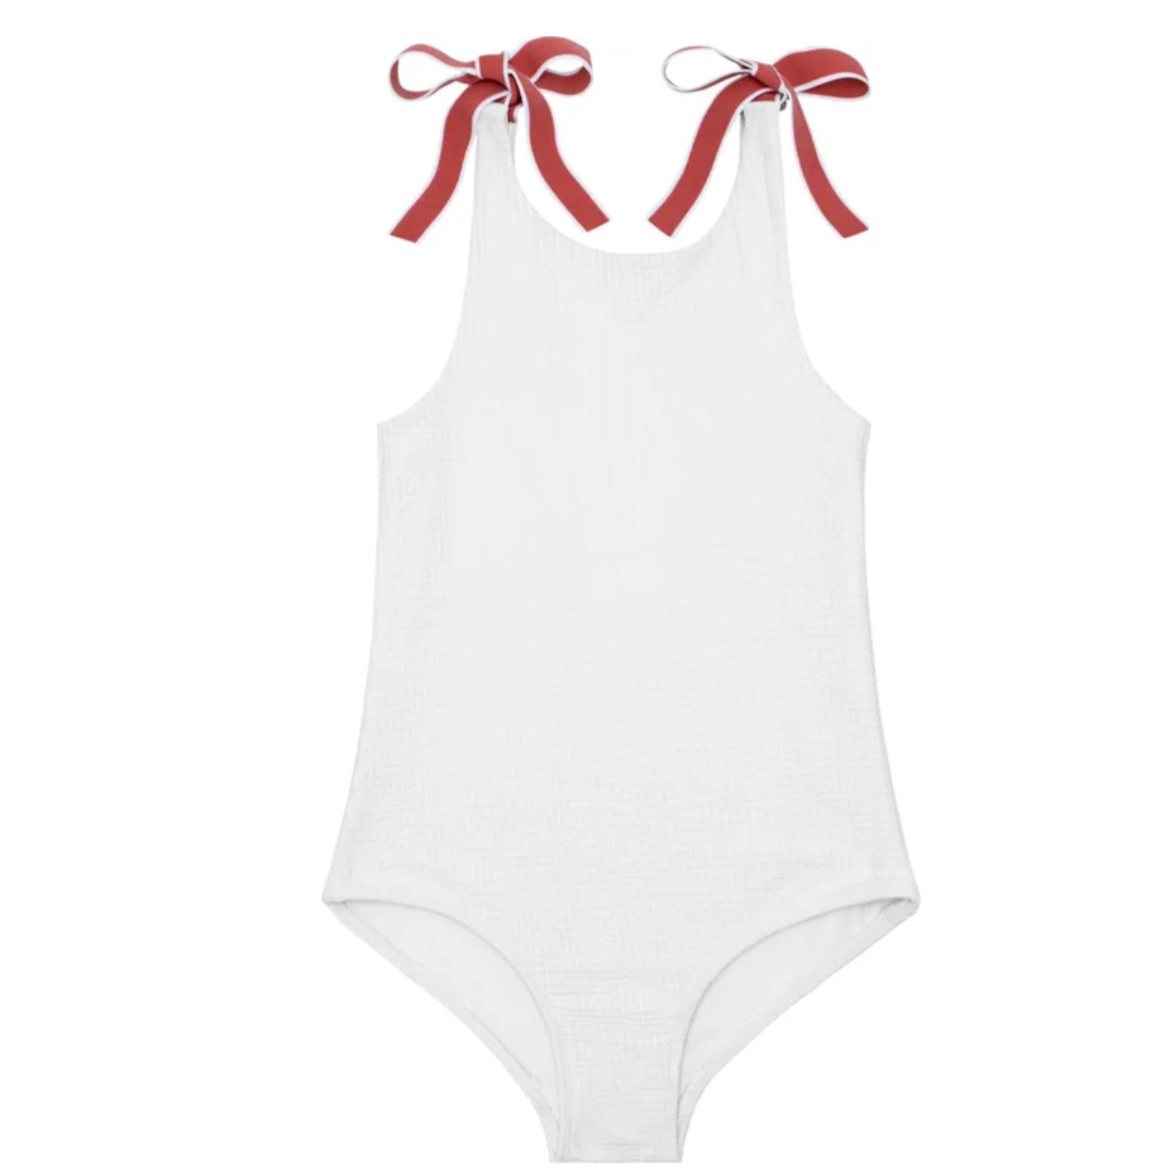 CAPESIDE WHITE TIE KNOT ONE PIECE